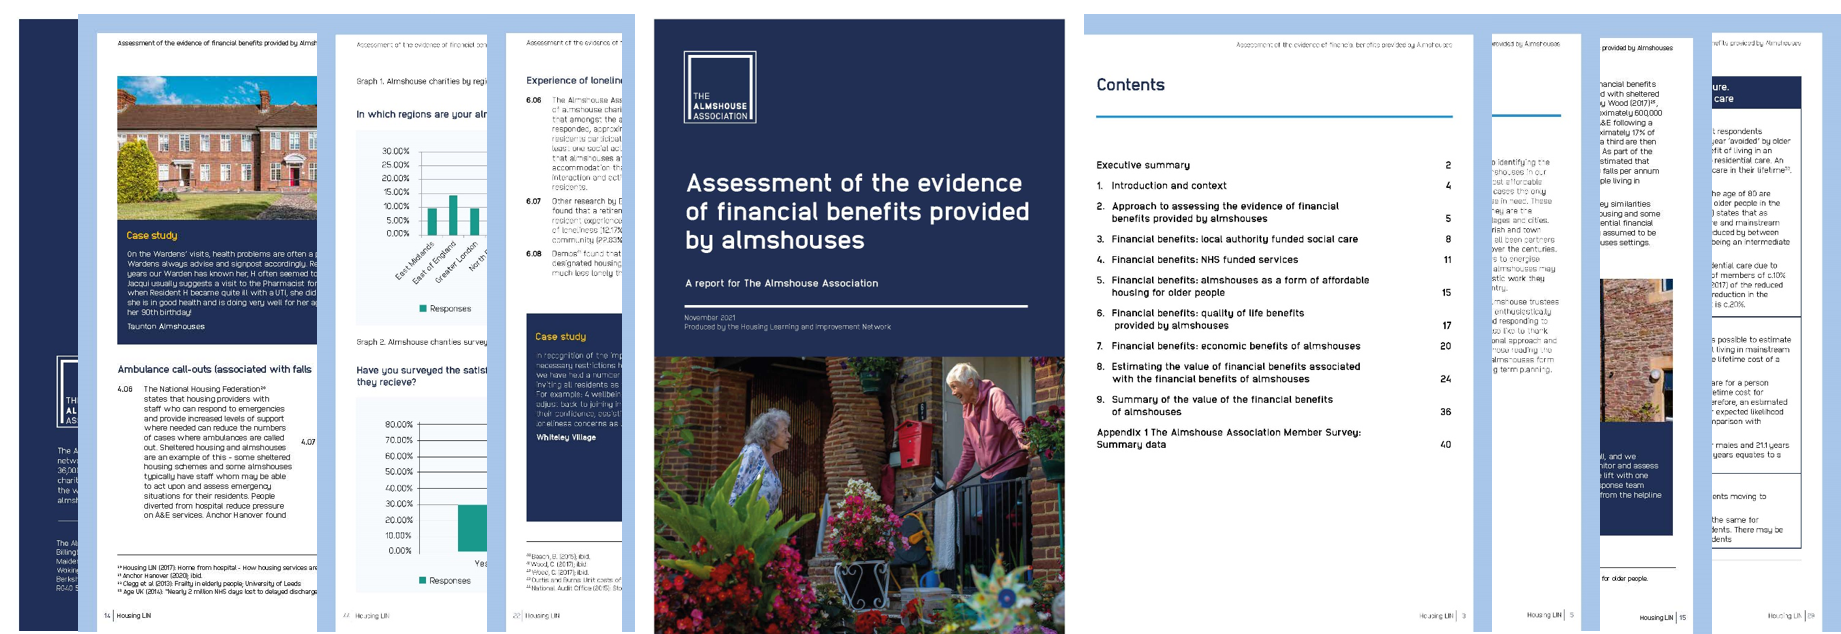 Association releases new research on financial benefits of almshouses